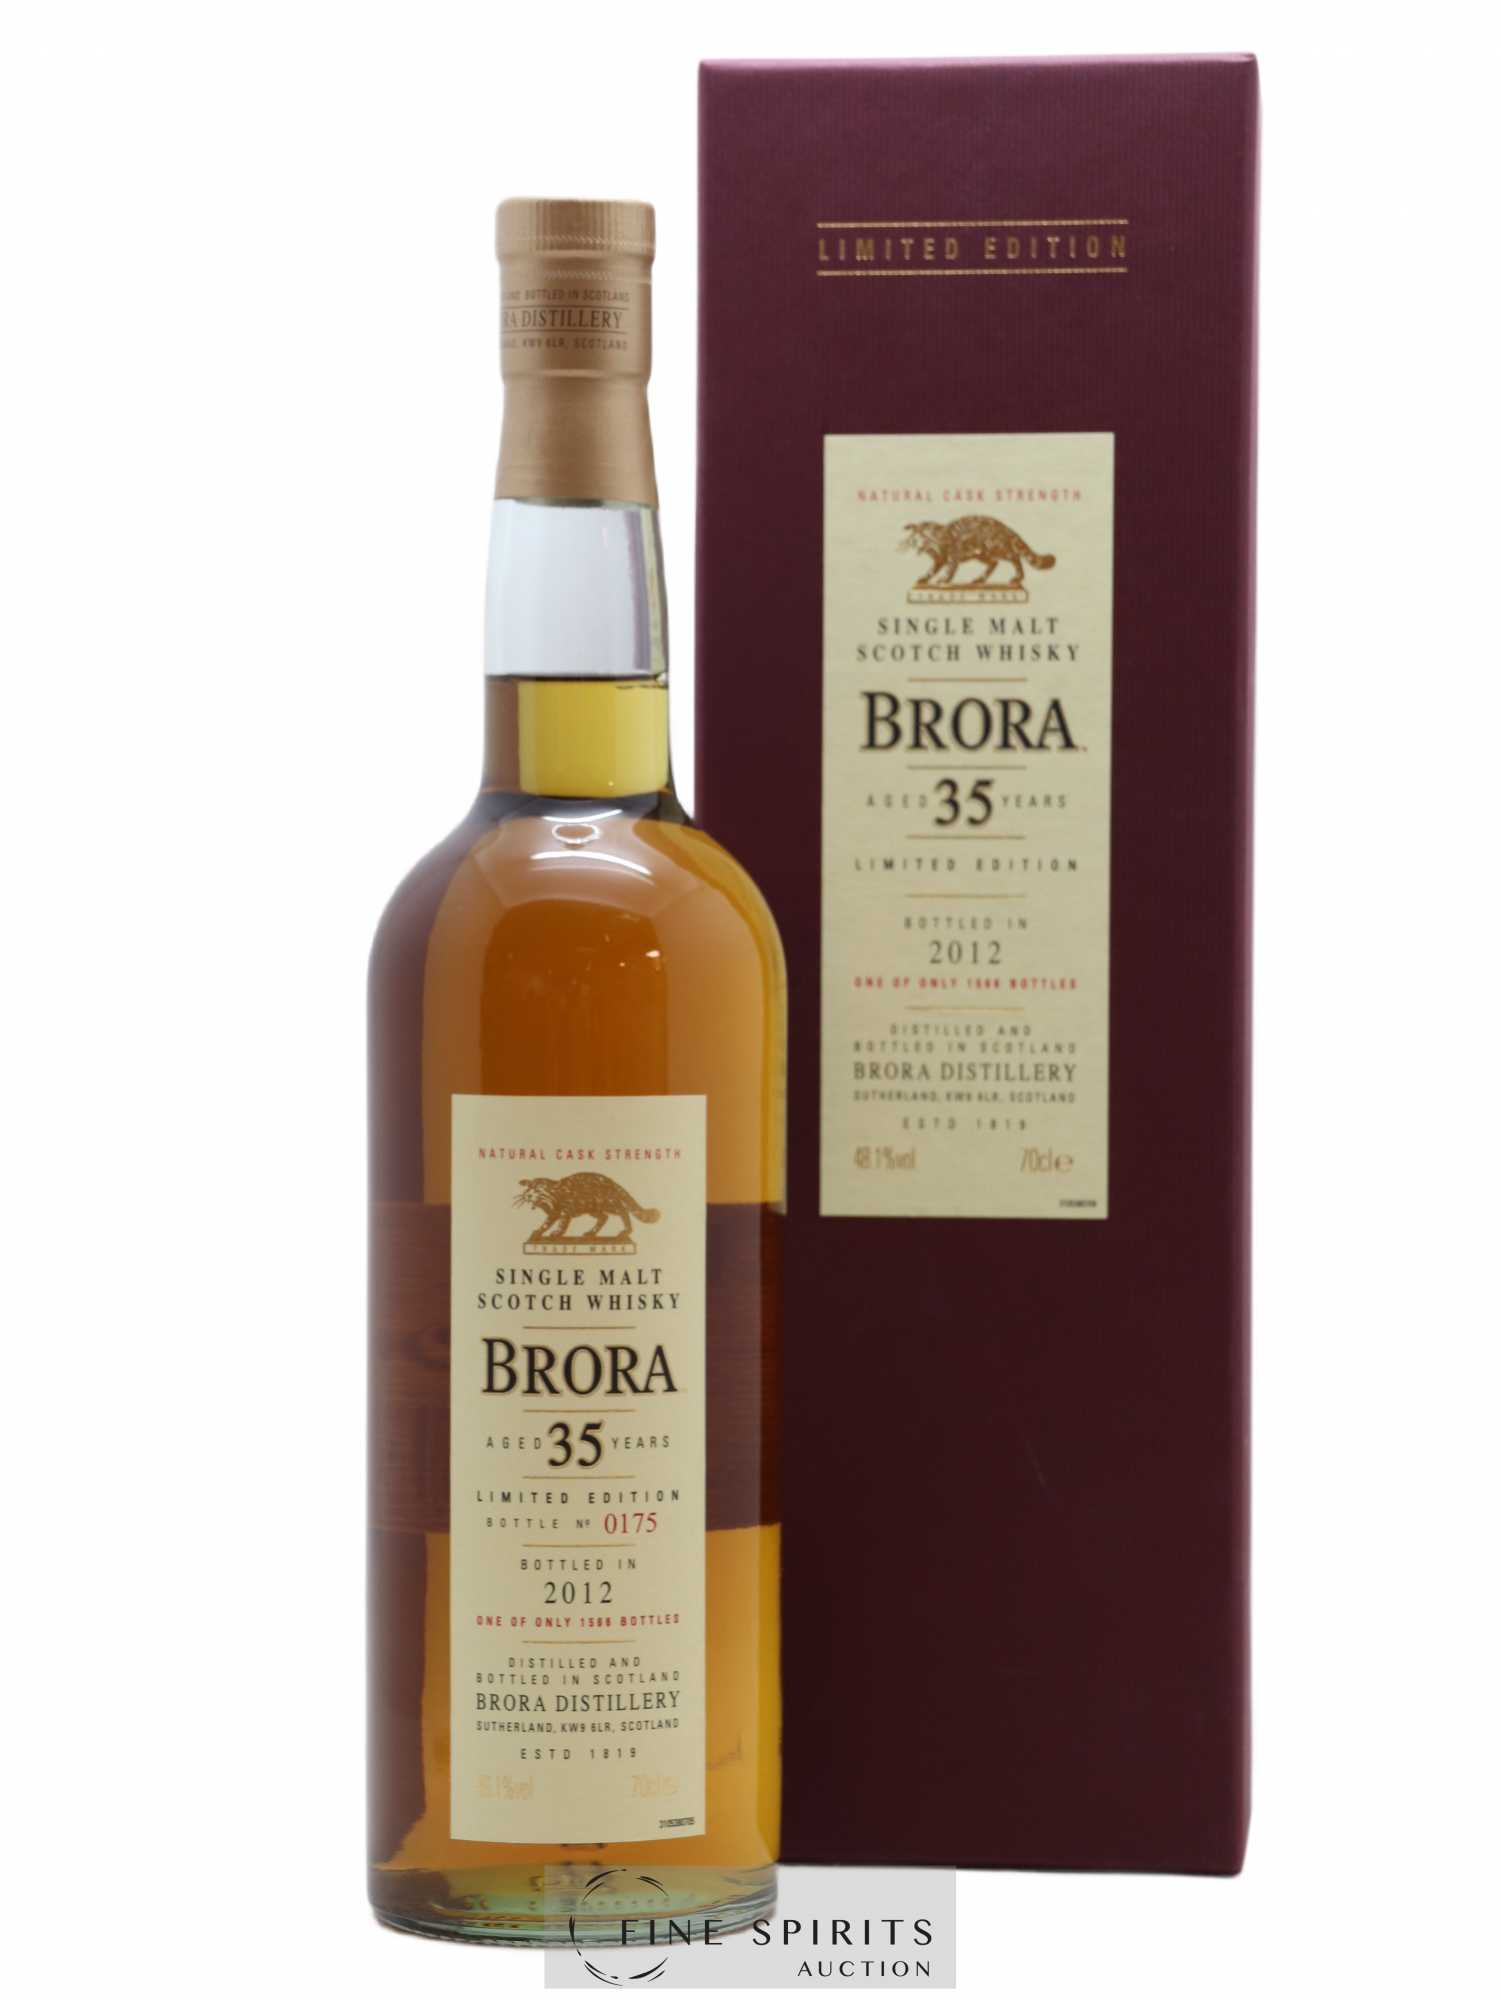 Brora 35 years Of. Natural Cask Strengh - One of 1566 - bottled 2012 Limited Edition 